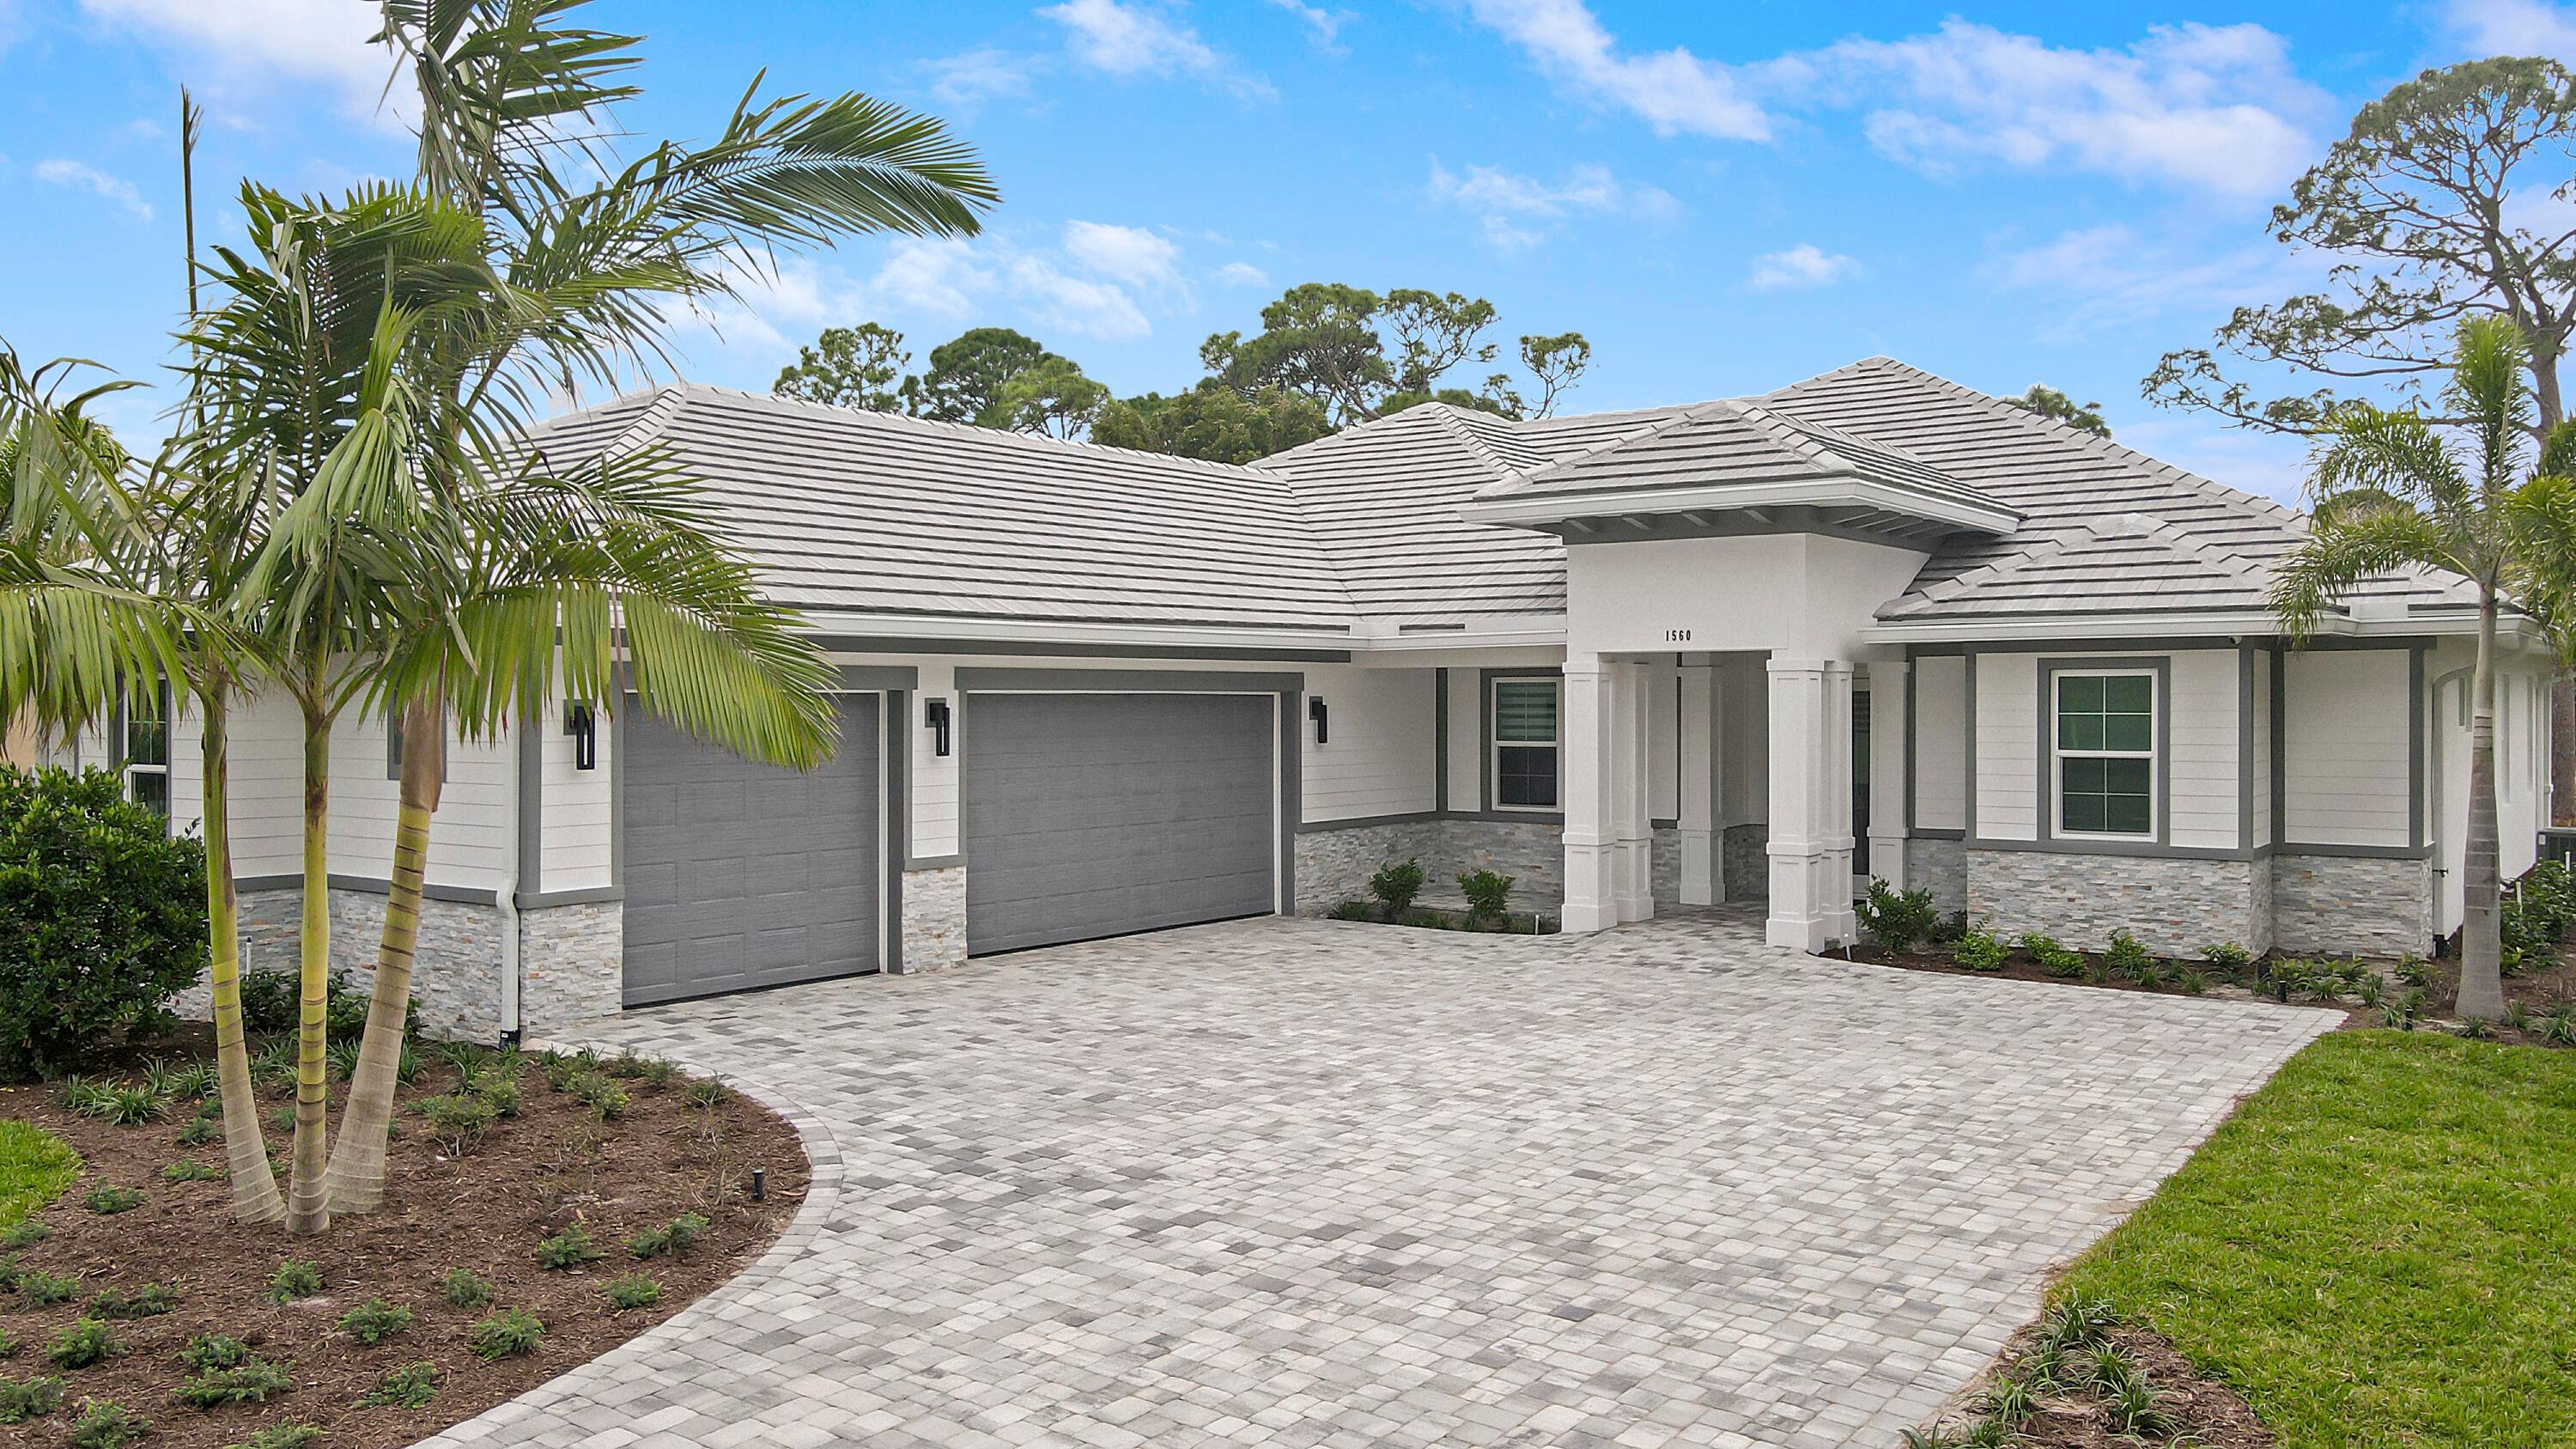 Welcome home to this captivating brand new CBS construction home in the exclusive gated community of Cobblestone.